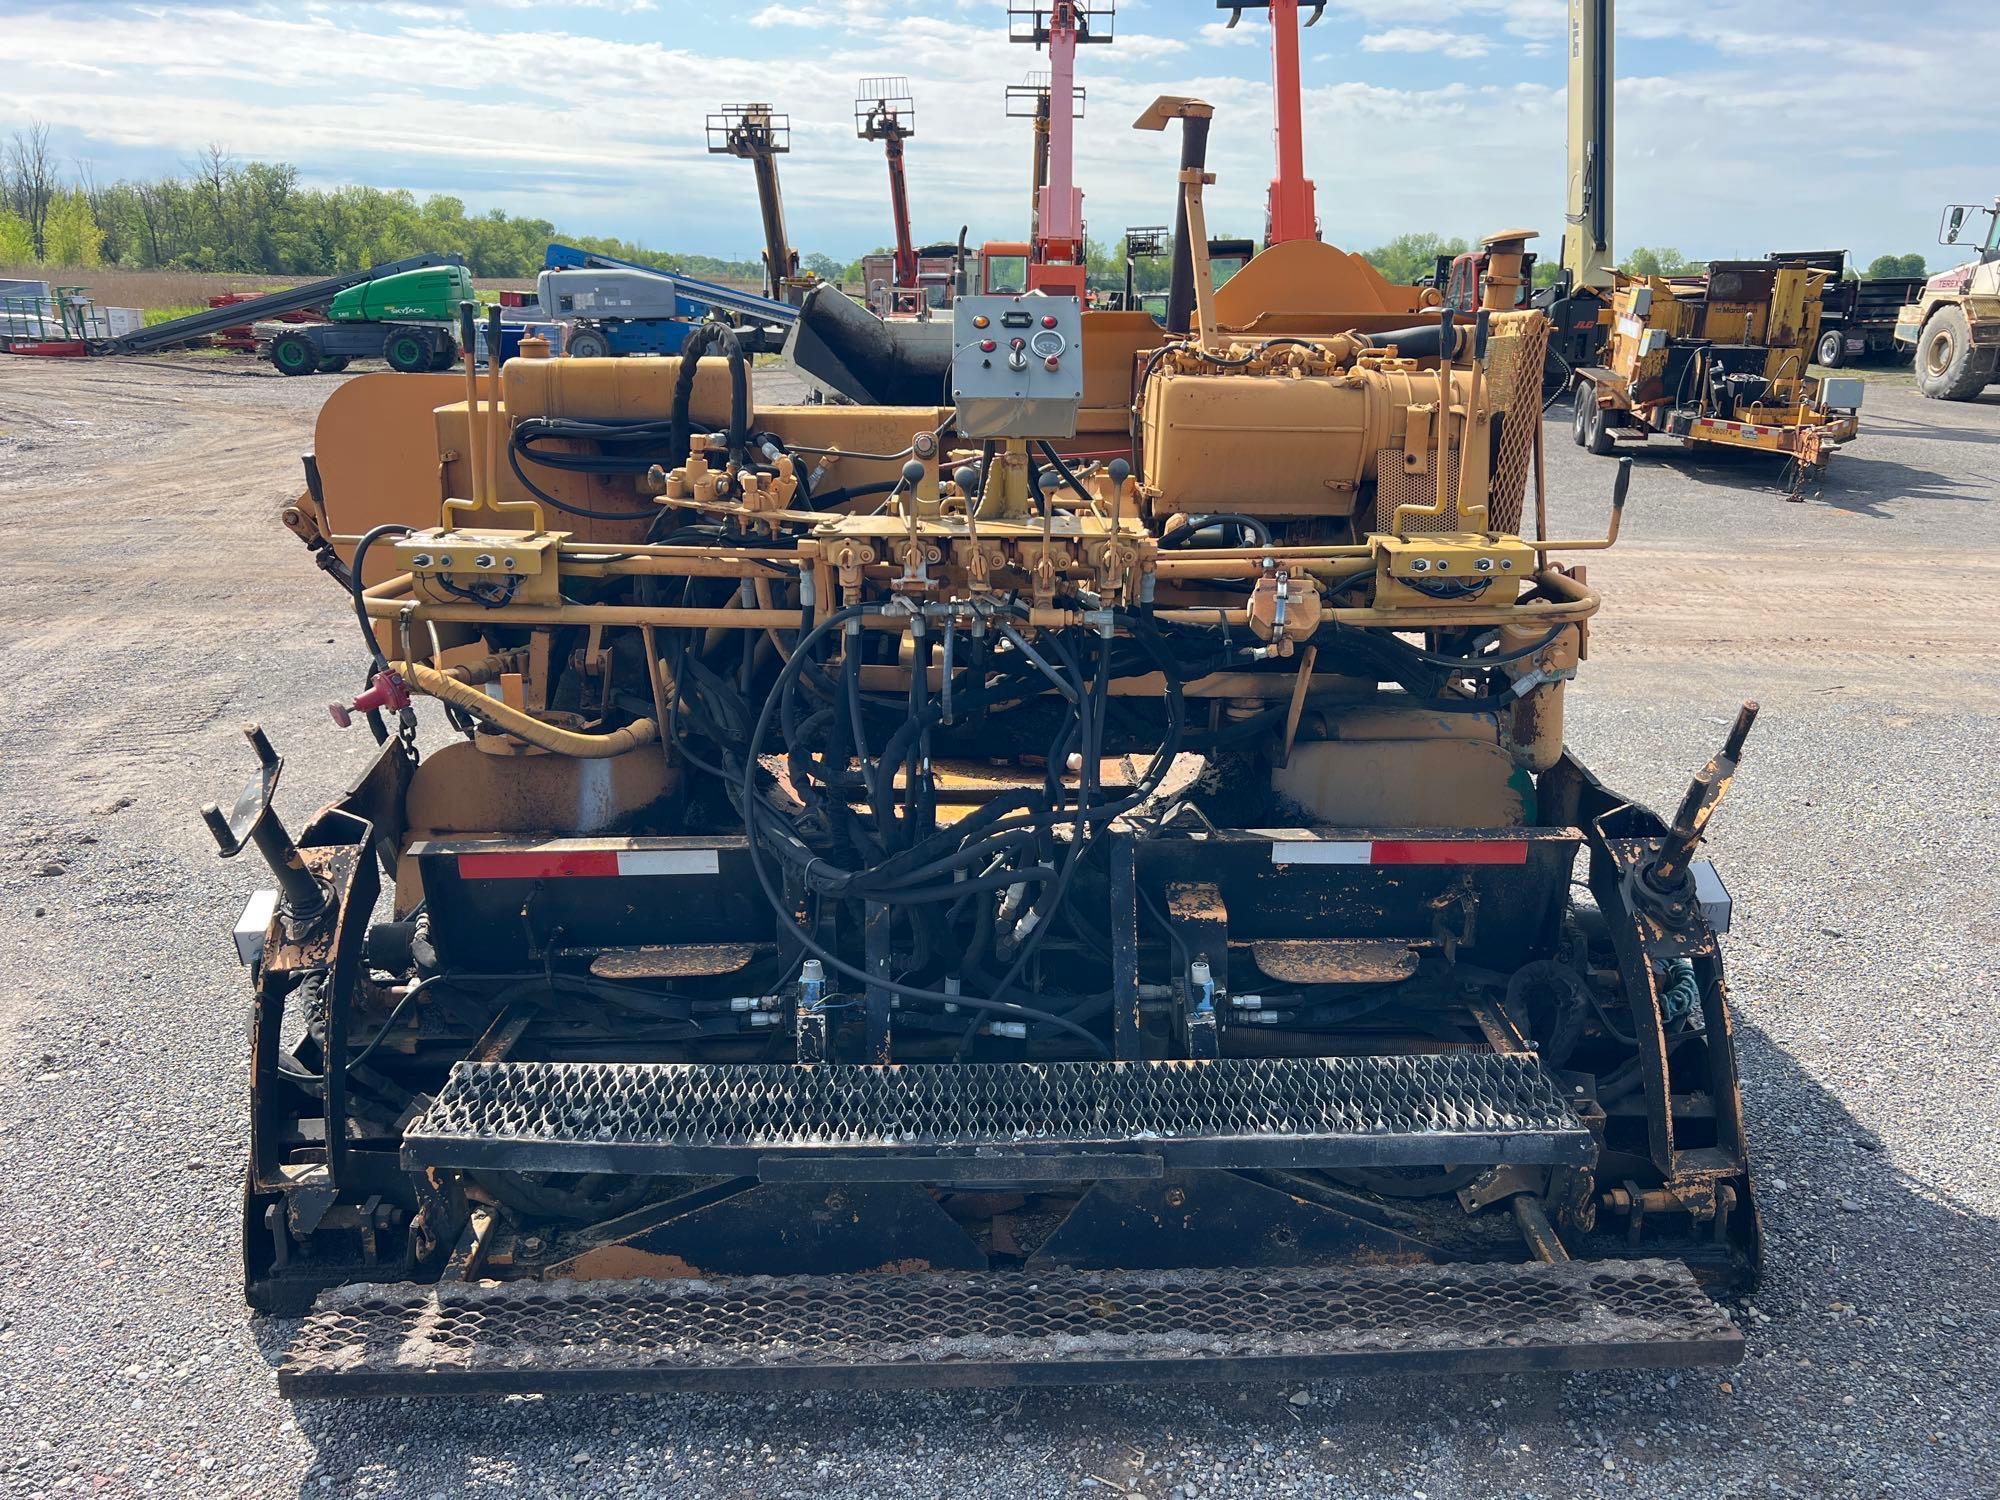 MAULDIN 1500 ASPHALT PAVER... SN NA... powered by Deutz diesel engine, equipped with propane heated